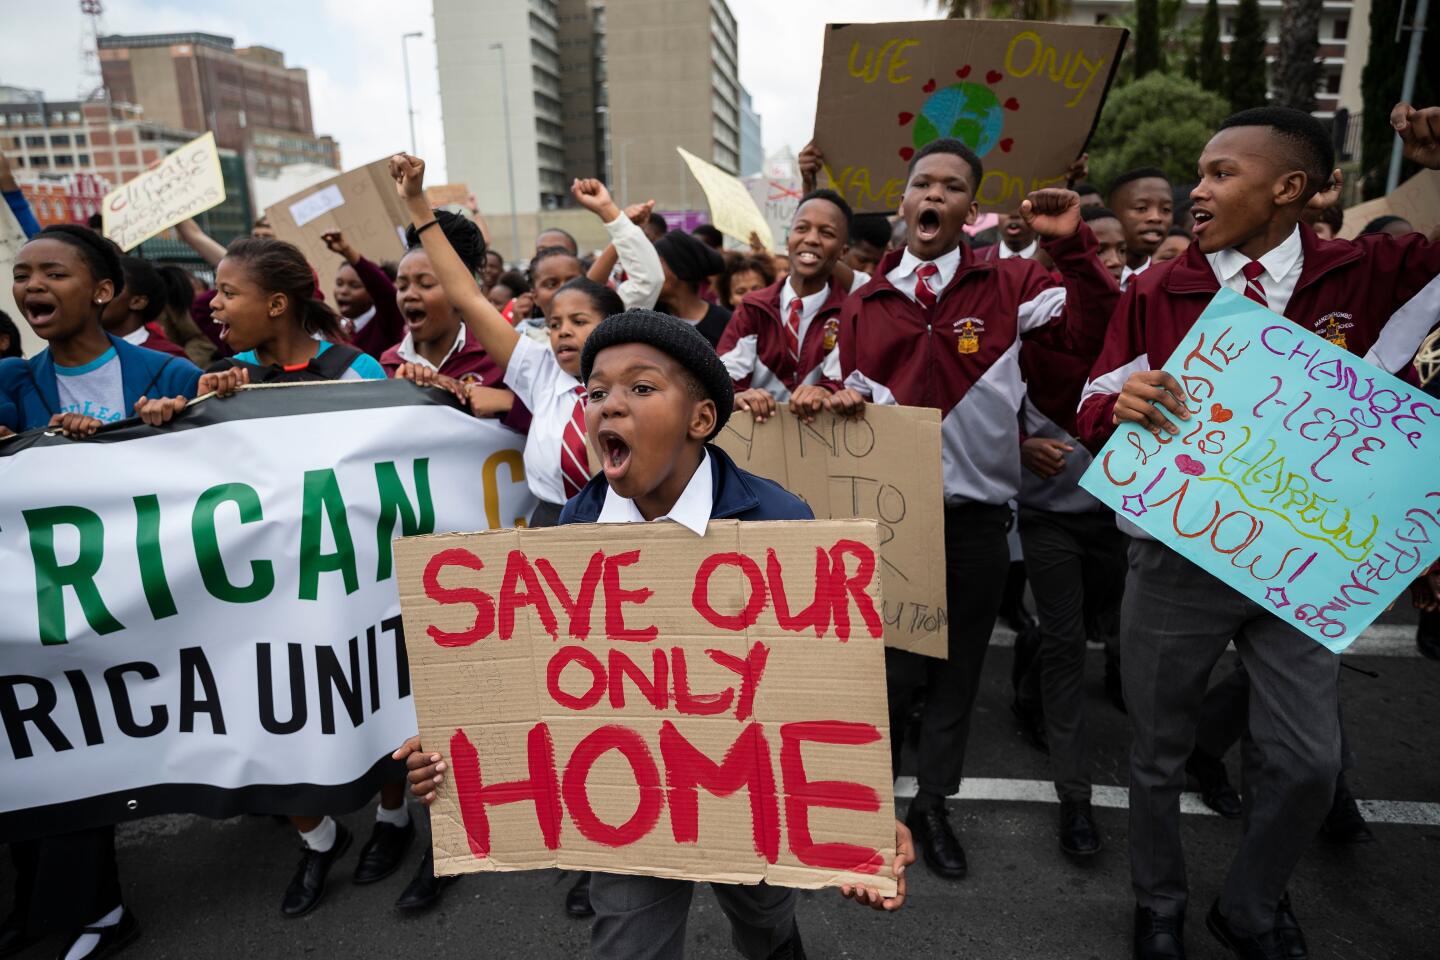 Mandatory Credit: Photo by NIC BOTHMA/EPA-EFE/REX (10419322d) Protesters take part in the Global Climate Strike as they march to parliament in Cape Town, South Africa, 20 September 2019. Thousands of children across South Africa joined the global call to action and climate strike protesting in Cape Town calling on government to make radical change in tackling climate change as millions of people around the world are taking part in protests demanding action on climate issues. Cape Town Global Climate Strike, South Africa - 20 Sep 2019 ** Usable by LA, CT and MoD ONLY **